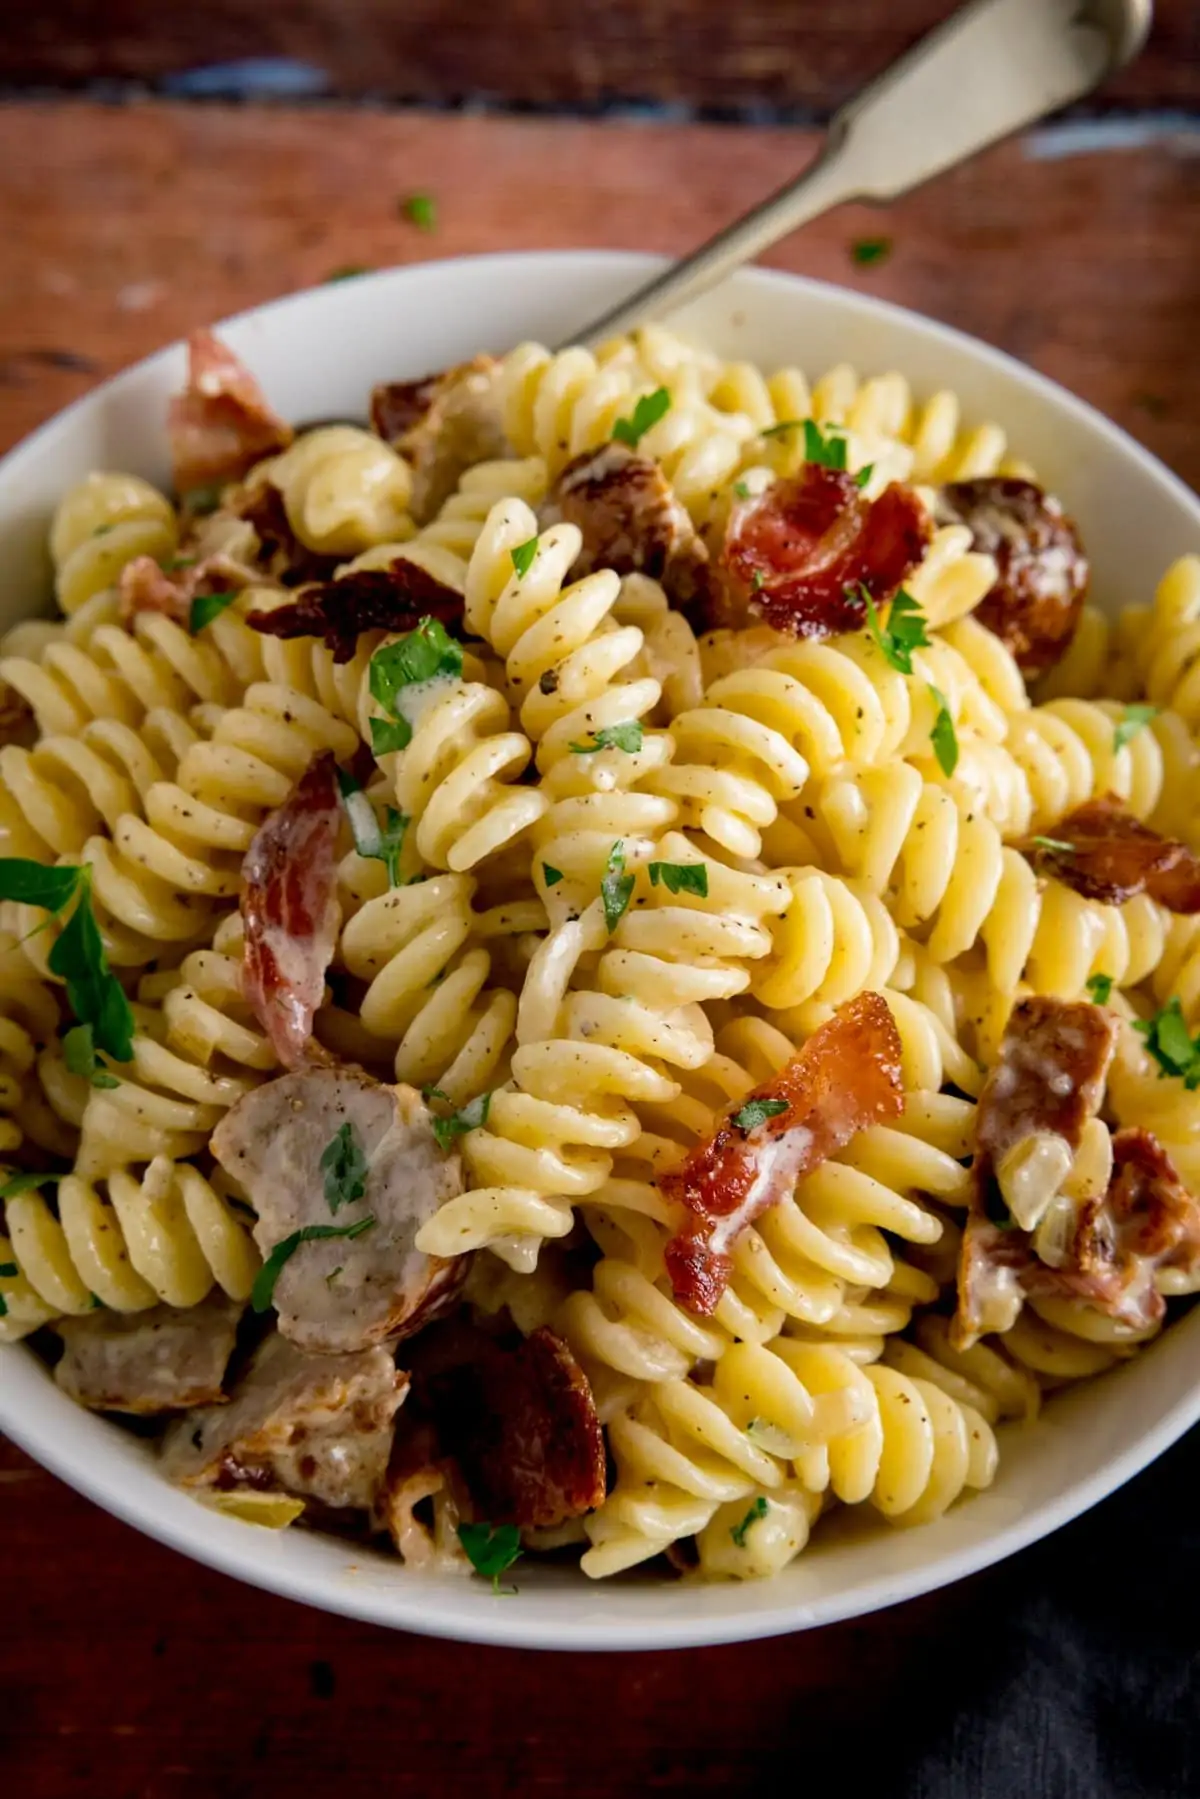 creamy pasta with sausage and bacon in a white bowl on a wooden surface. There is a fork sticking out of the pasta.